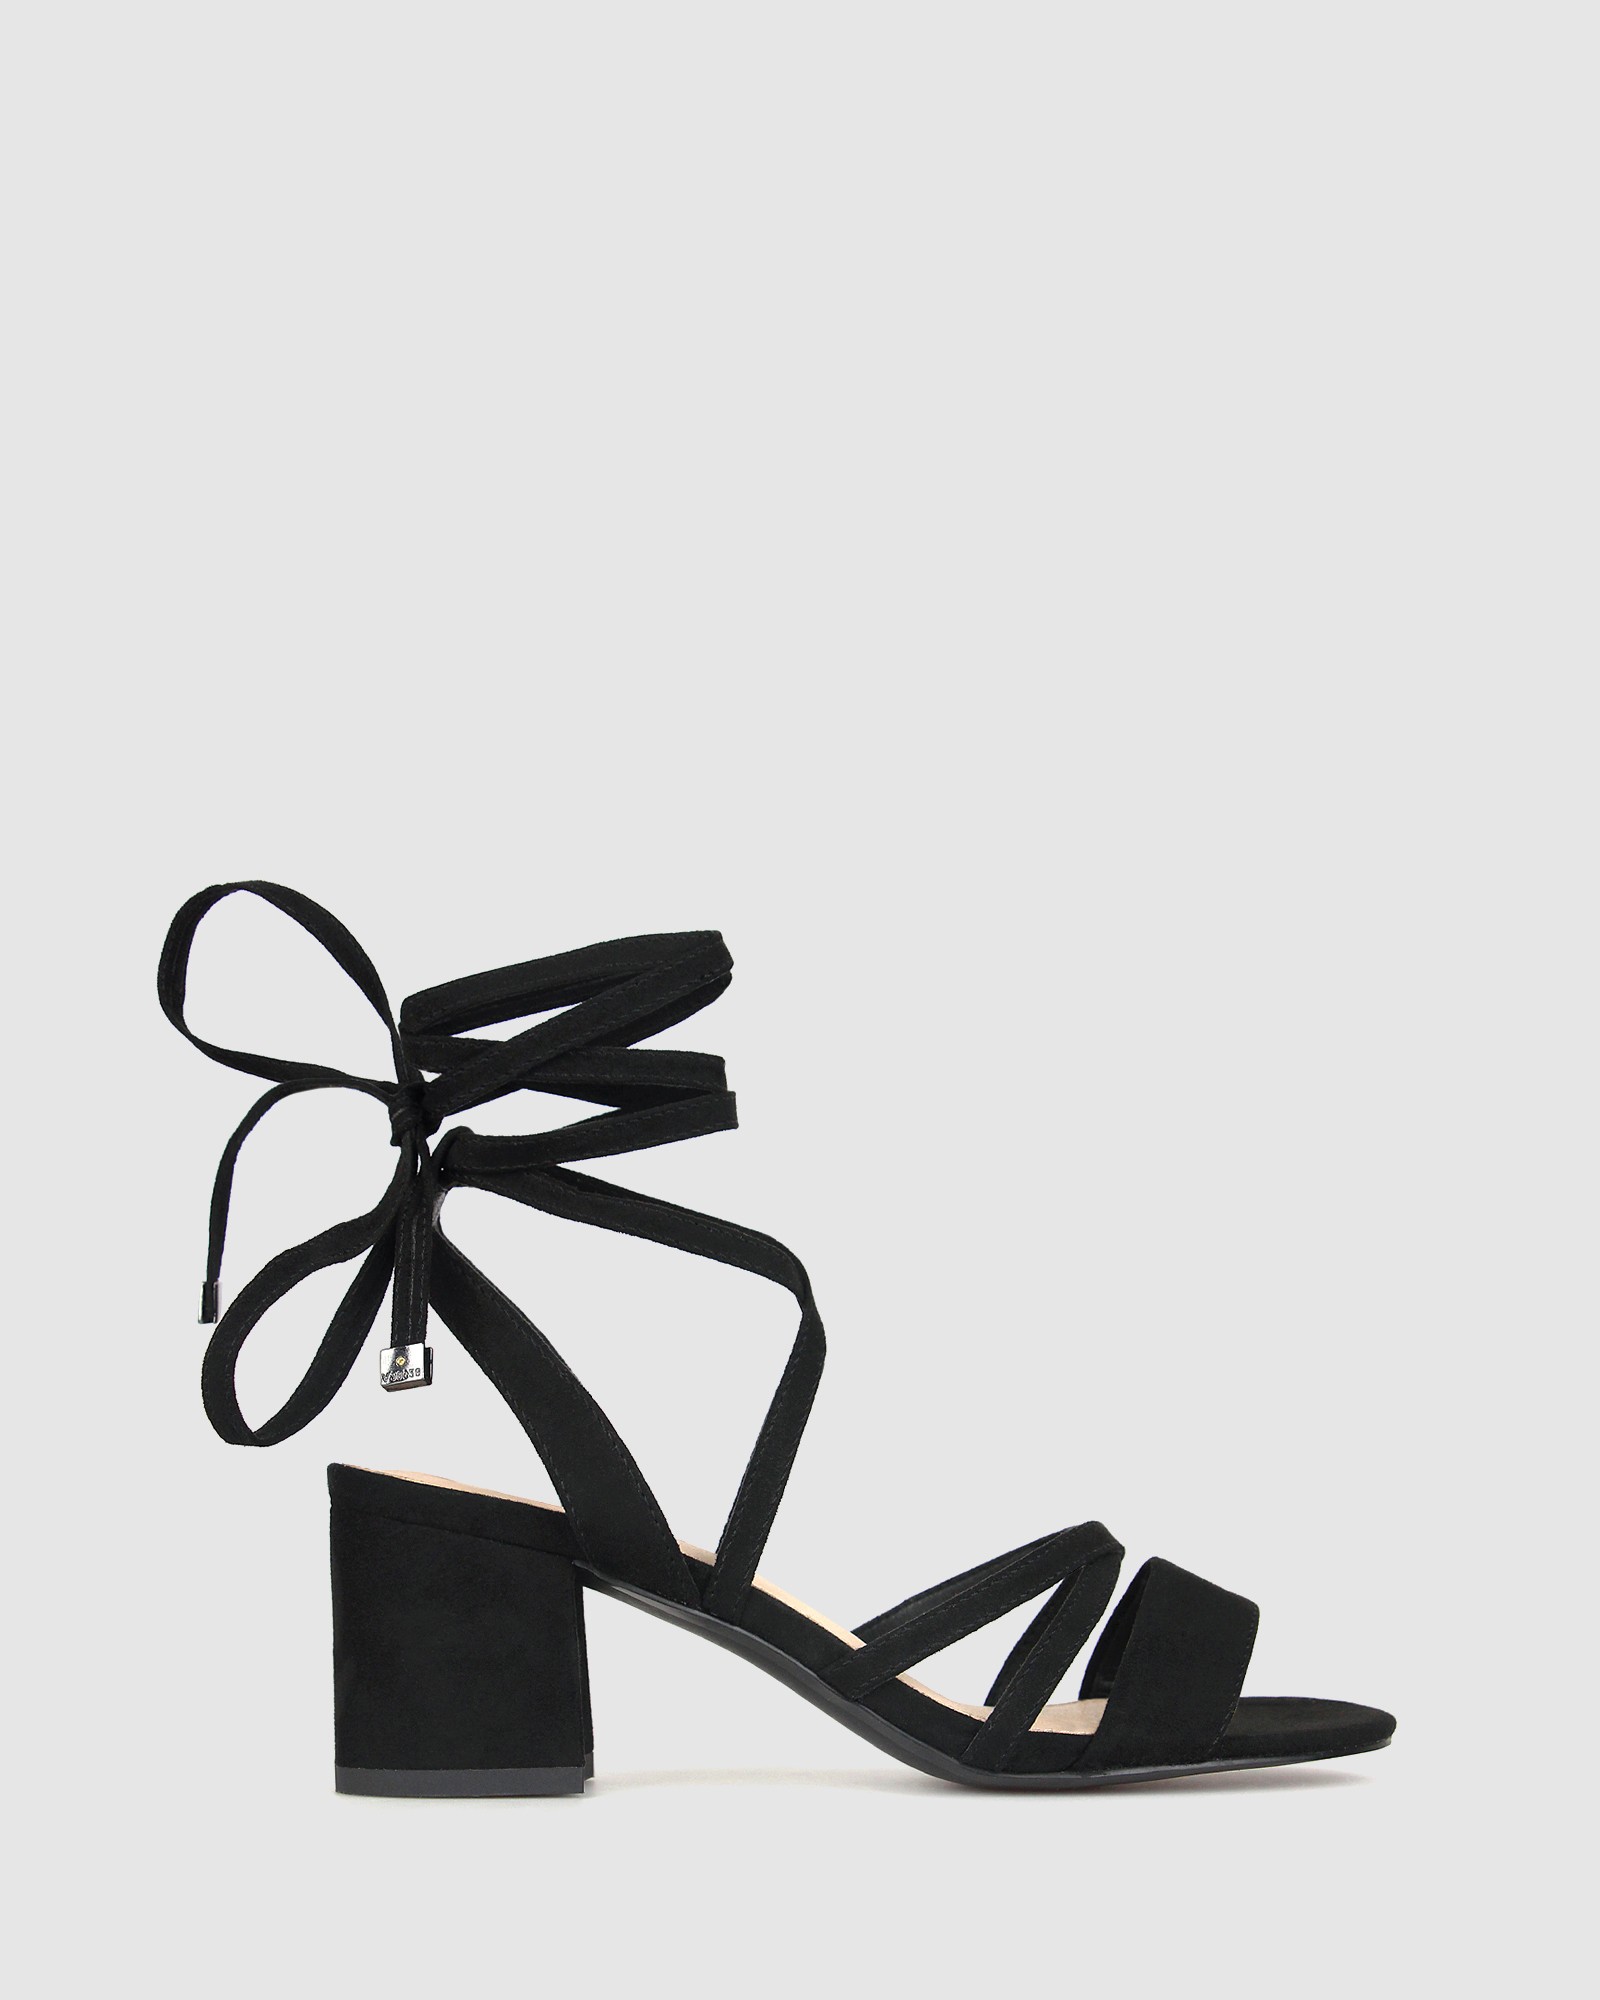 Malone Block Heel Sandals Black Micro by Betts | ShoeSales